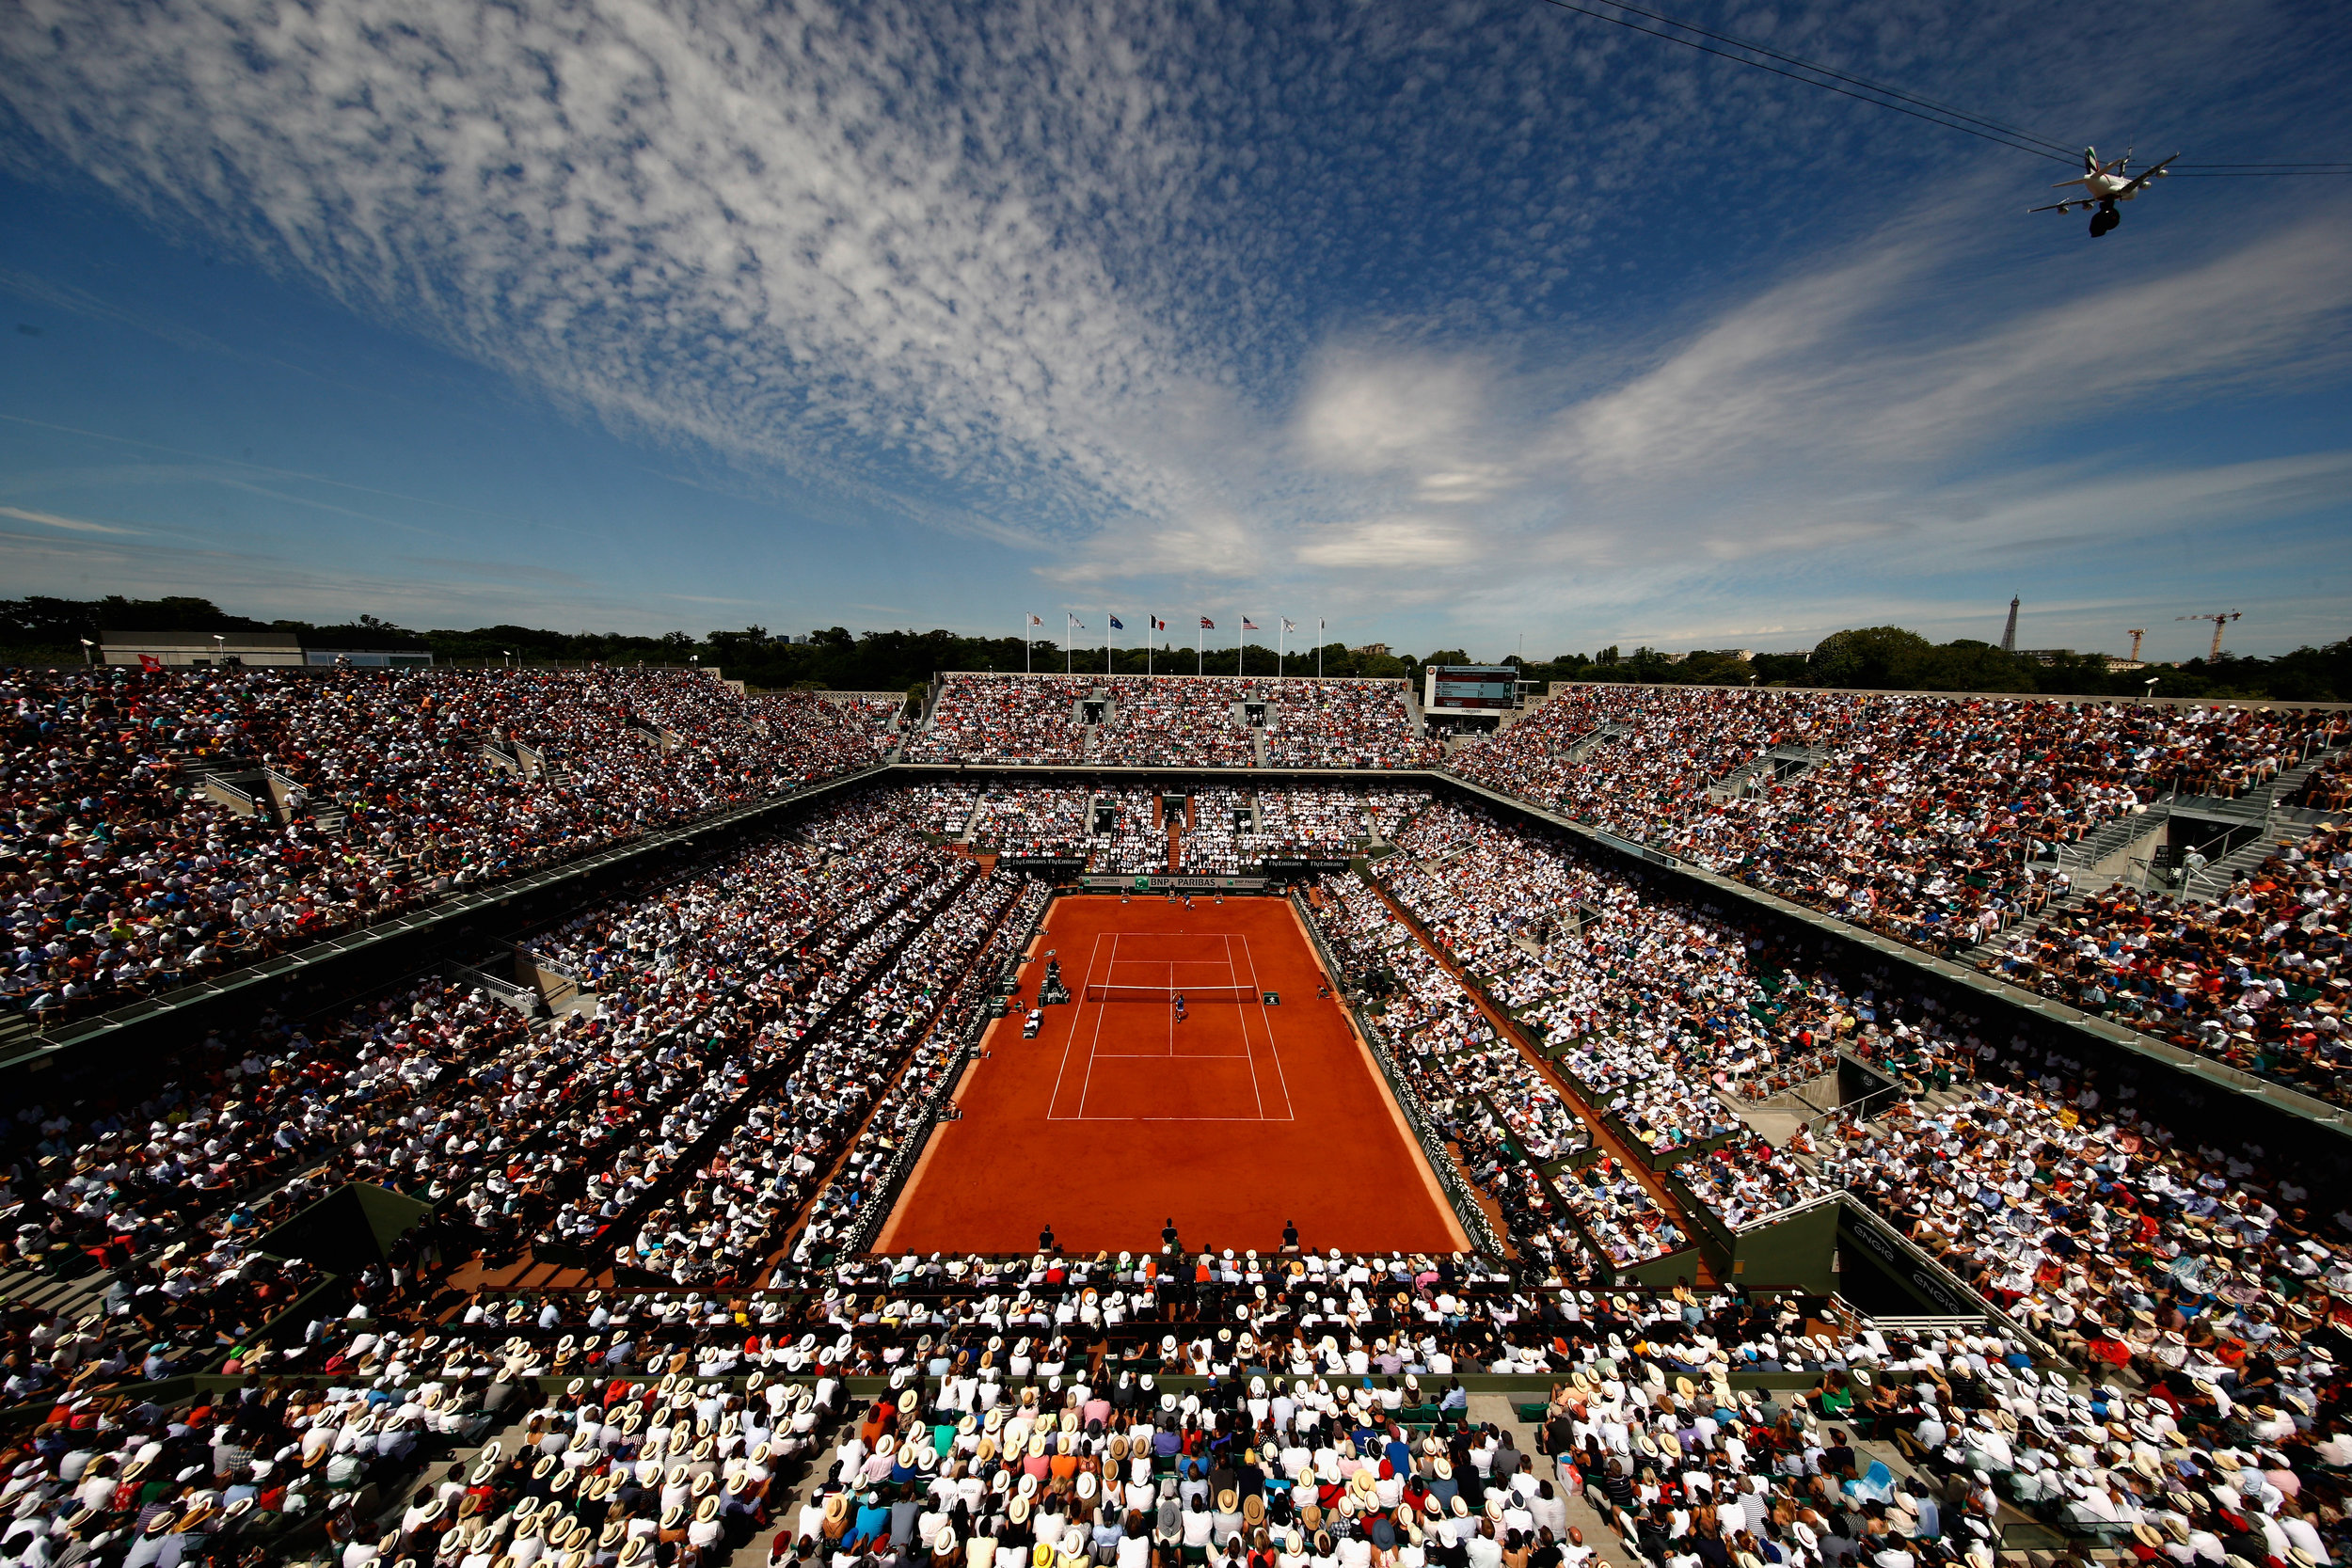   French Open  Source: SBS 